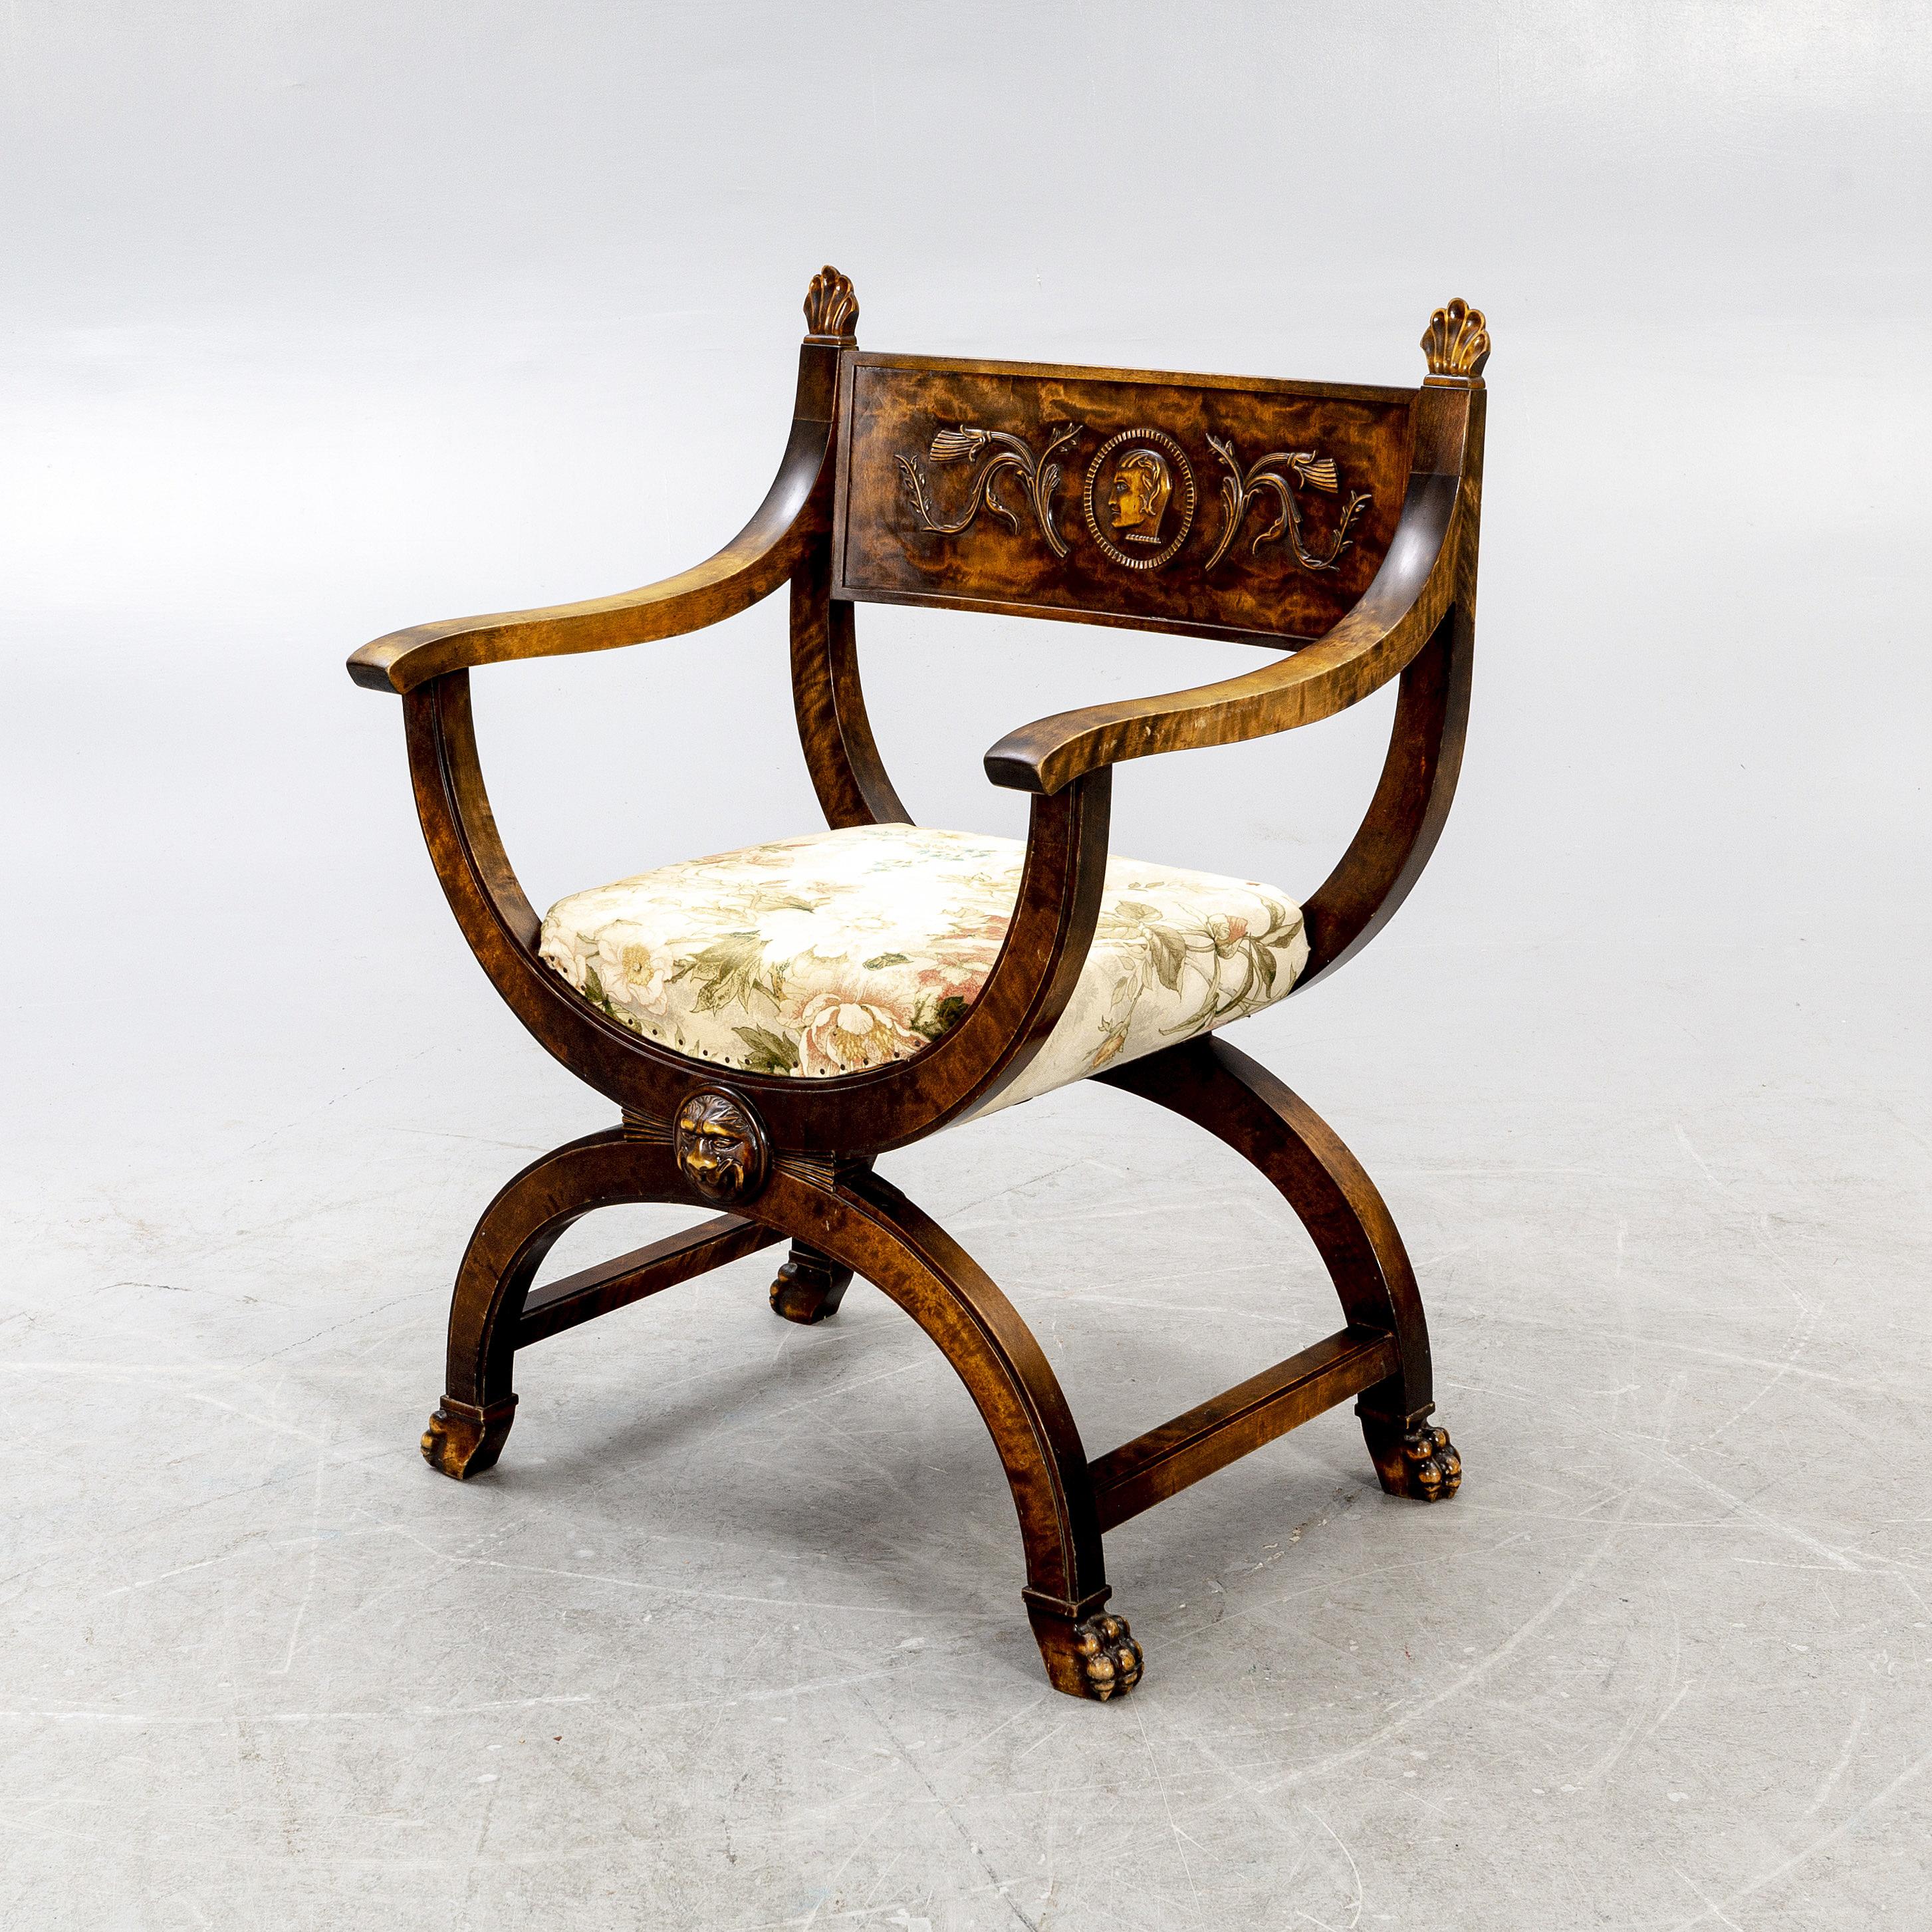 Dimensions for this chair are H 90 x 64 x 52. Seat Height 47. The actual upholstery is 44 x 44 cm. The upholstery is original.
Swedish Art Deco chair made by Axel Einar Hjorth circa 1920s-1930s for Bodafors of Sweden. Constructed from Flamed birch